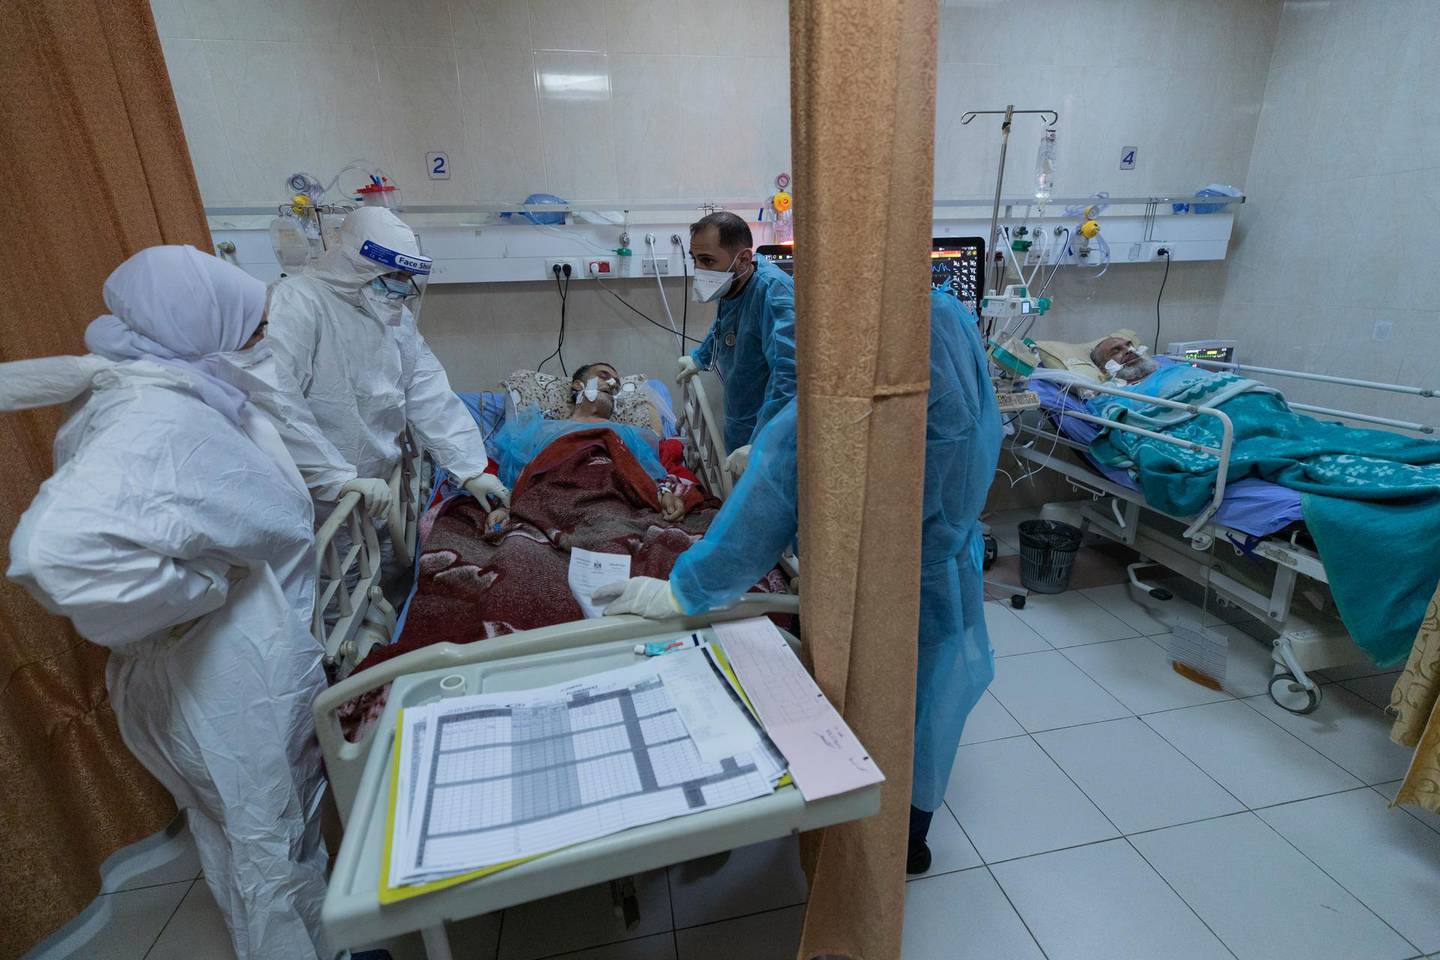 Medical staffers attend a Palestinian COVID-19 patient at the intensive care unit, in the Palestine Medical Complex, in the West Bank city of Ramallah, Thursday, Jan. 28, 2021. (AP Photo/Nasser Nasser)